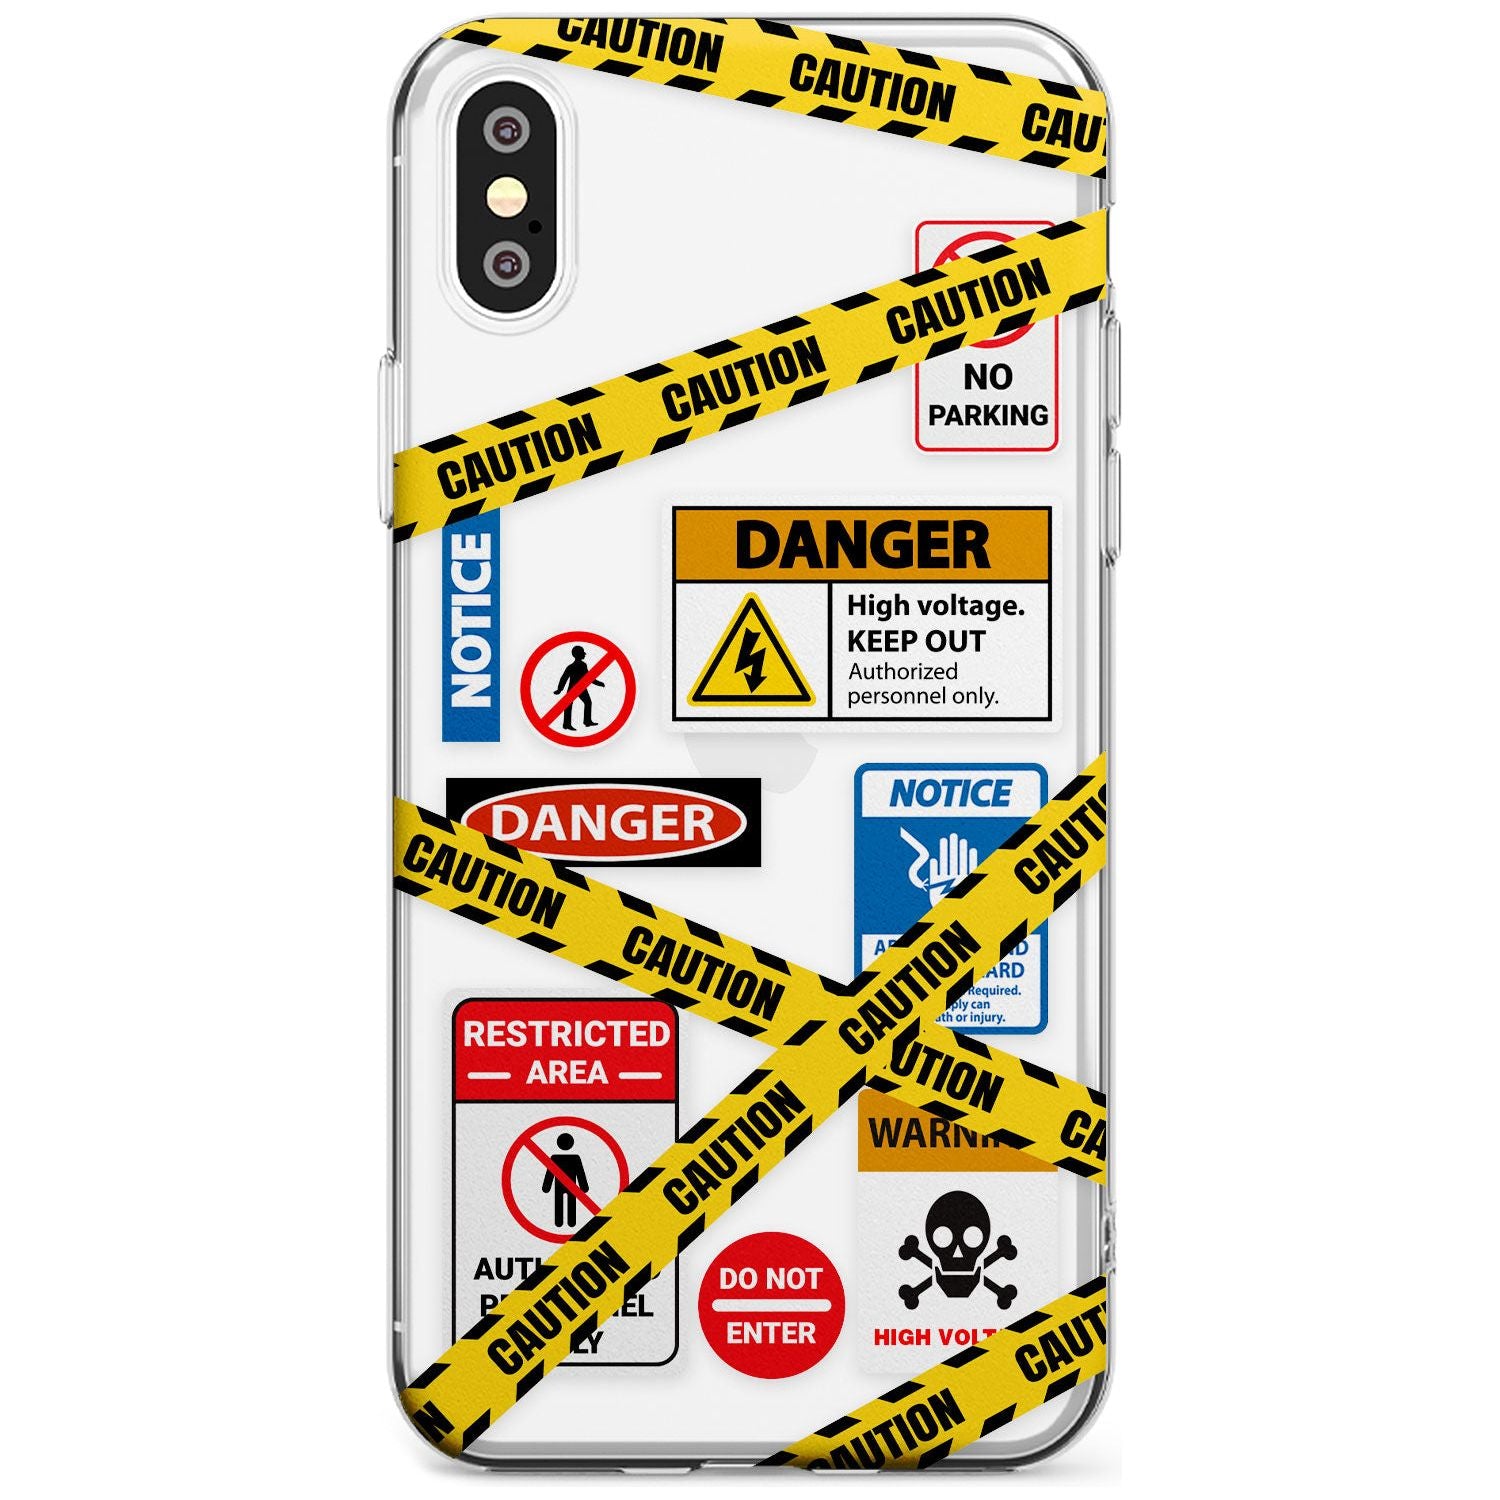 CAUTION Black Impact Phone Case for iPhone X XS Max XR